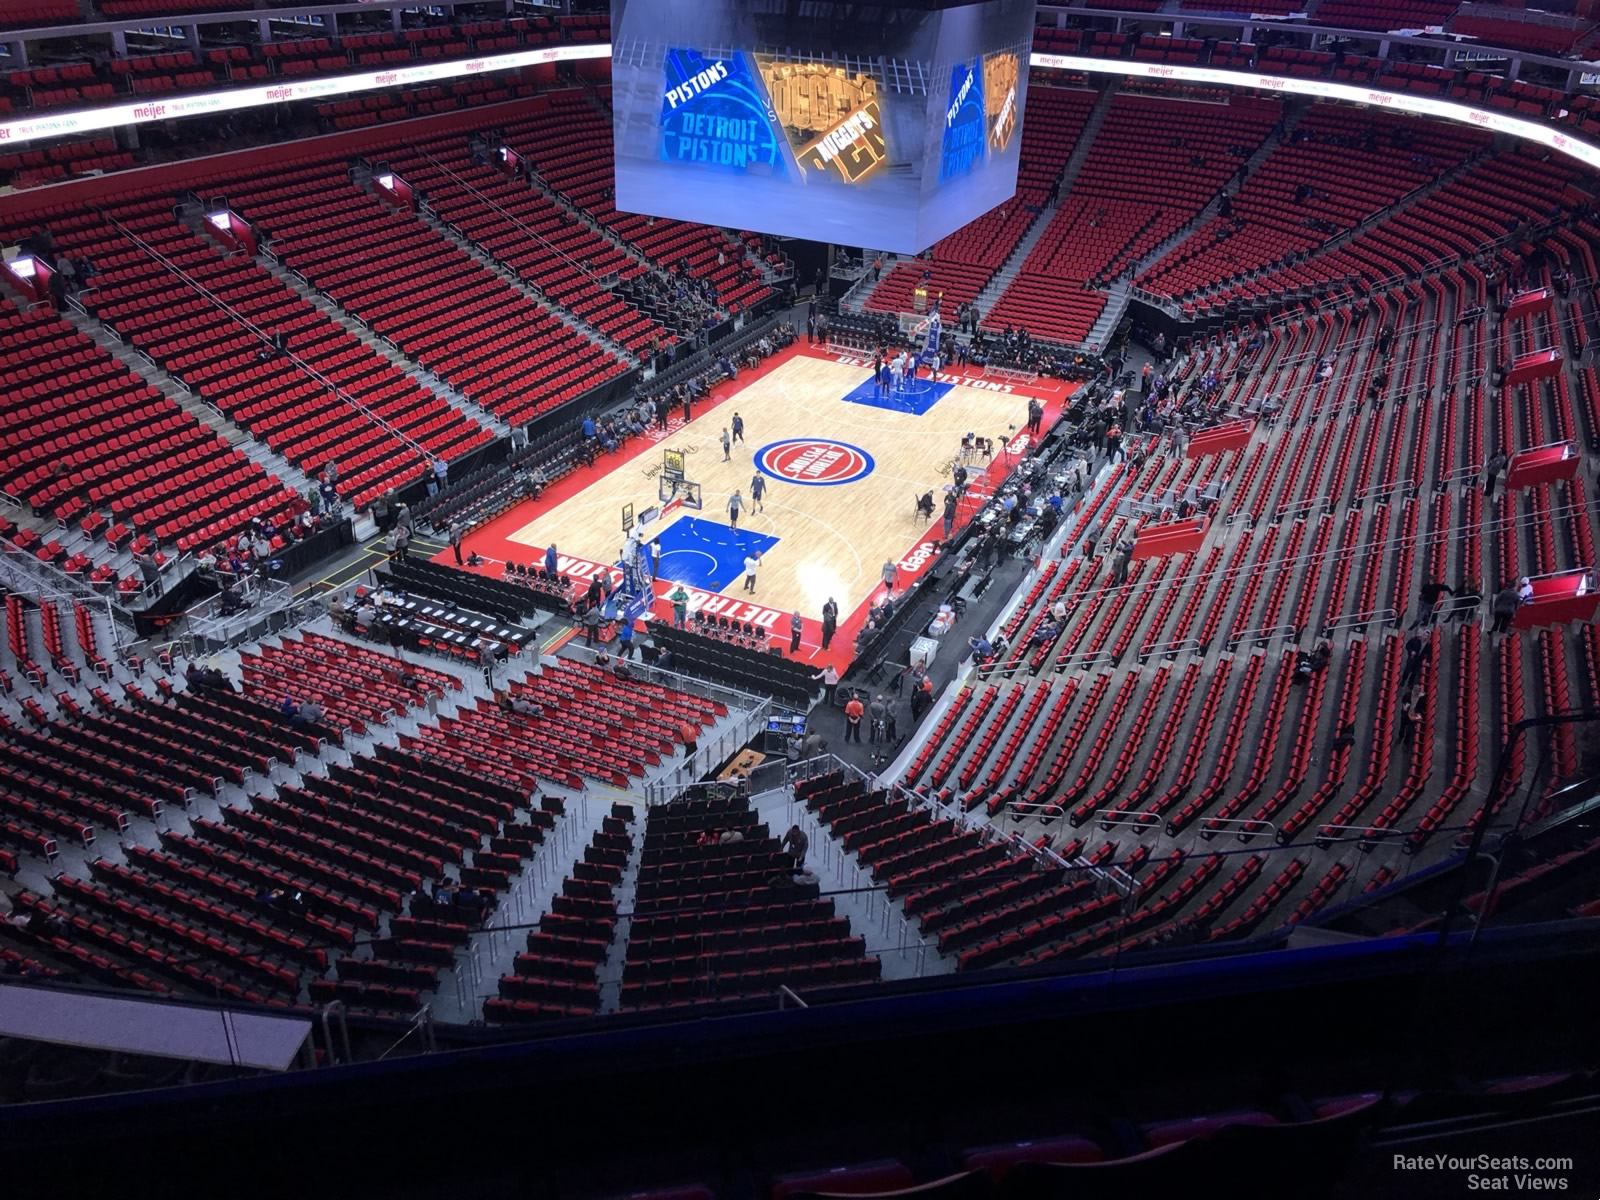 section 232, row 4 seat view  for basketball - little caesars arena